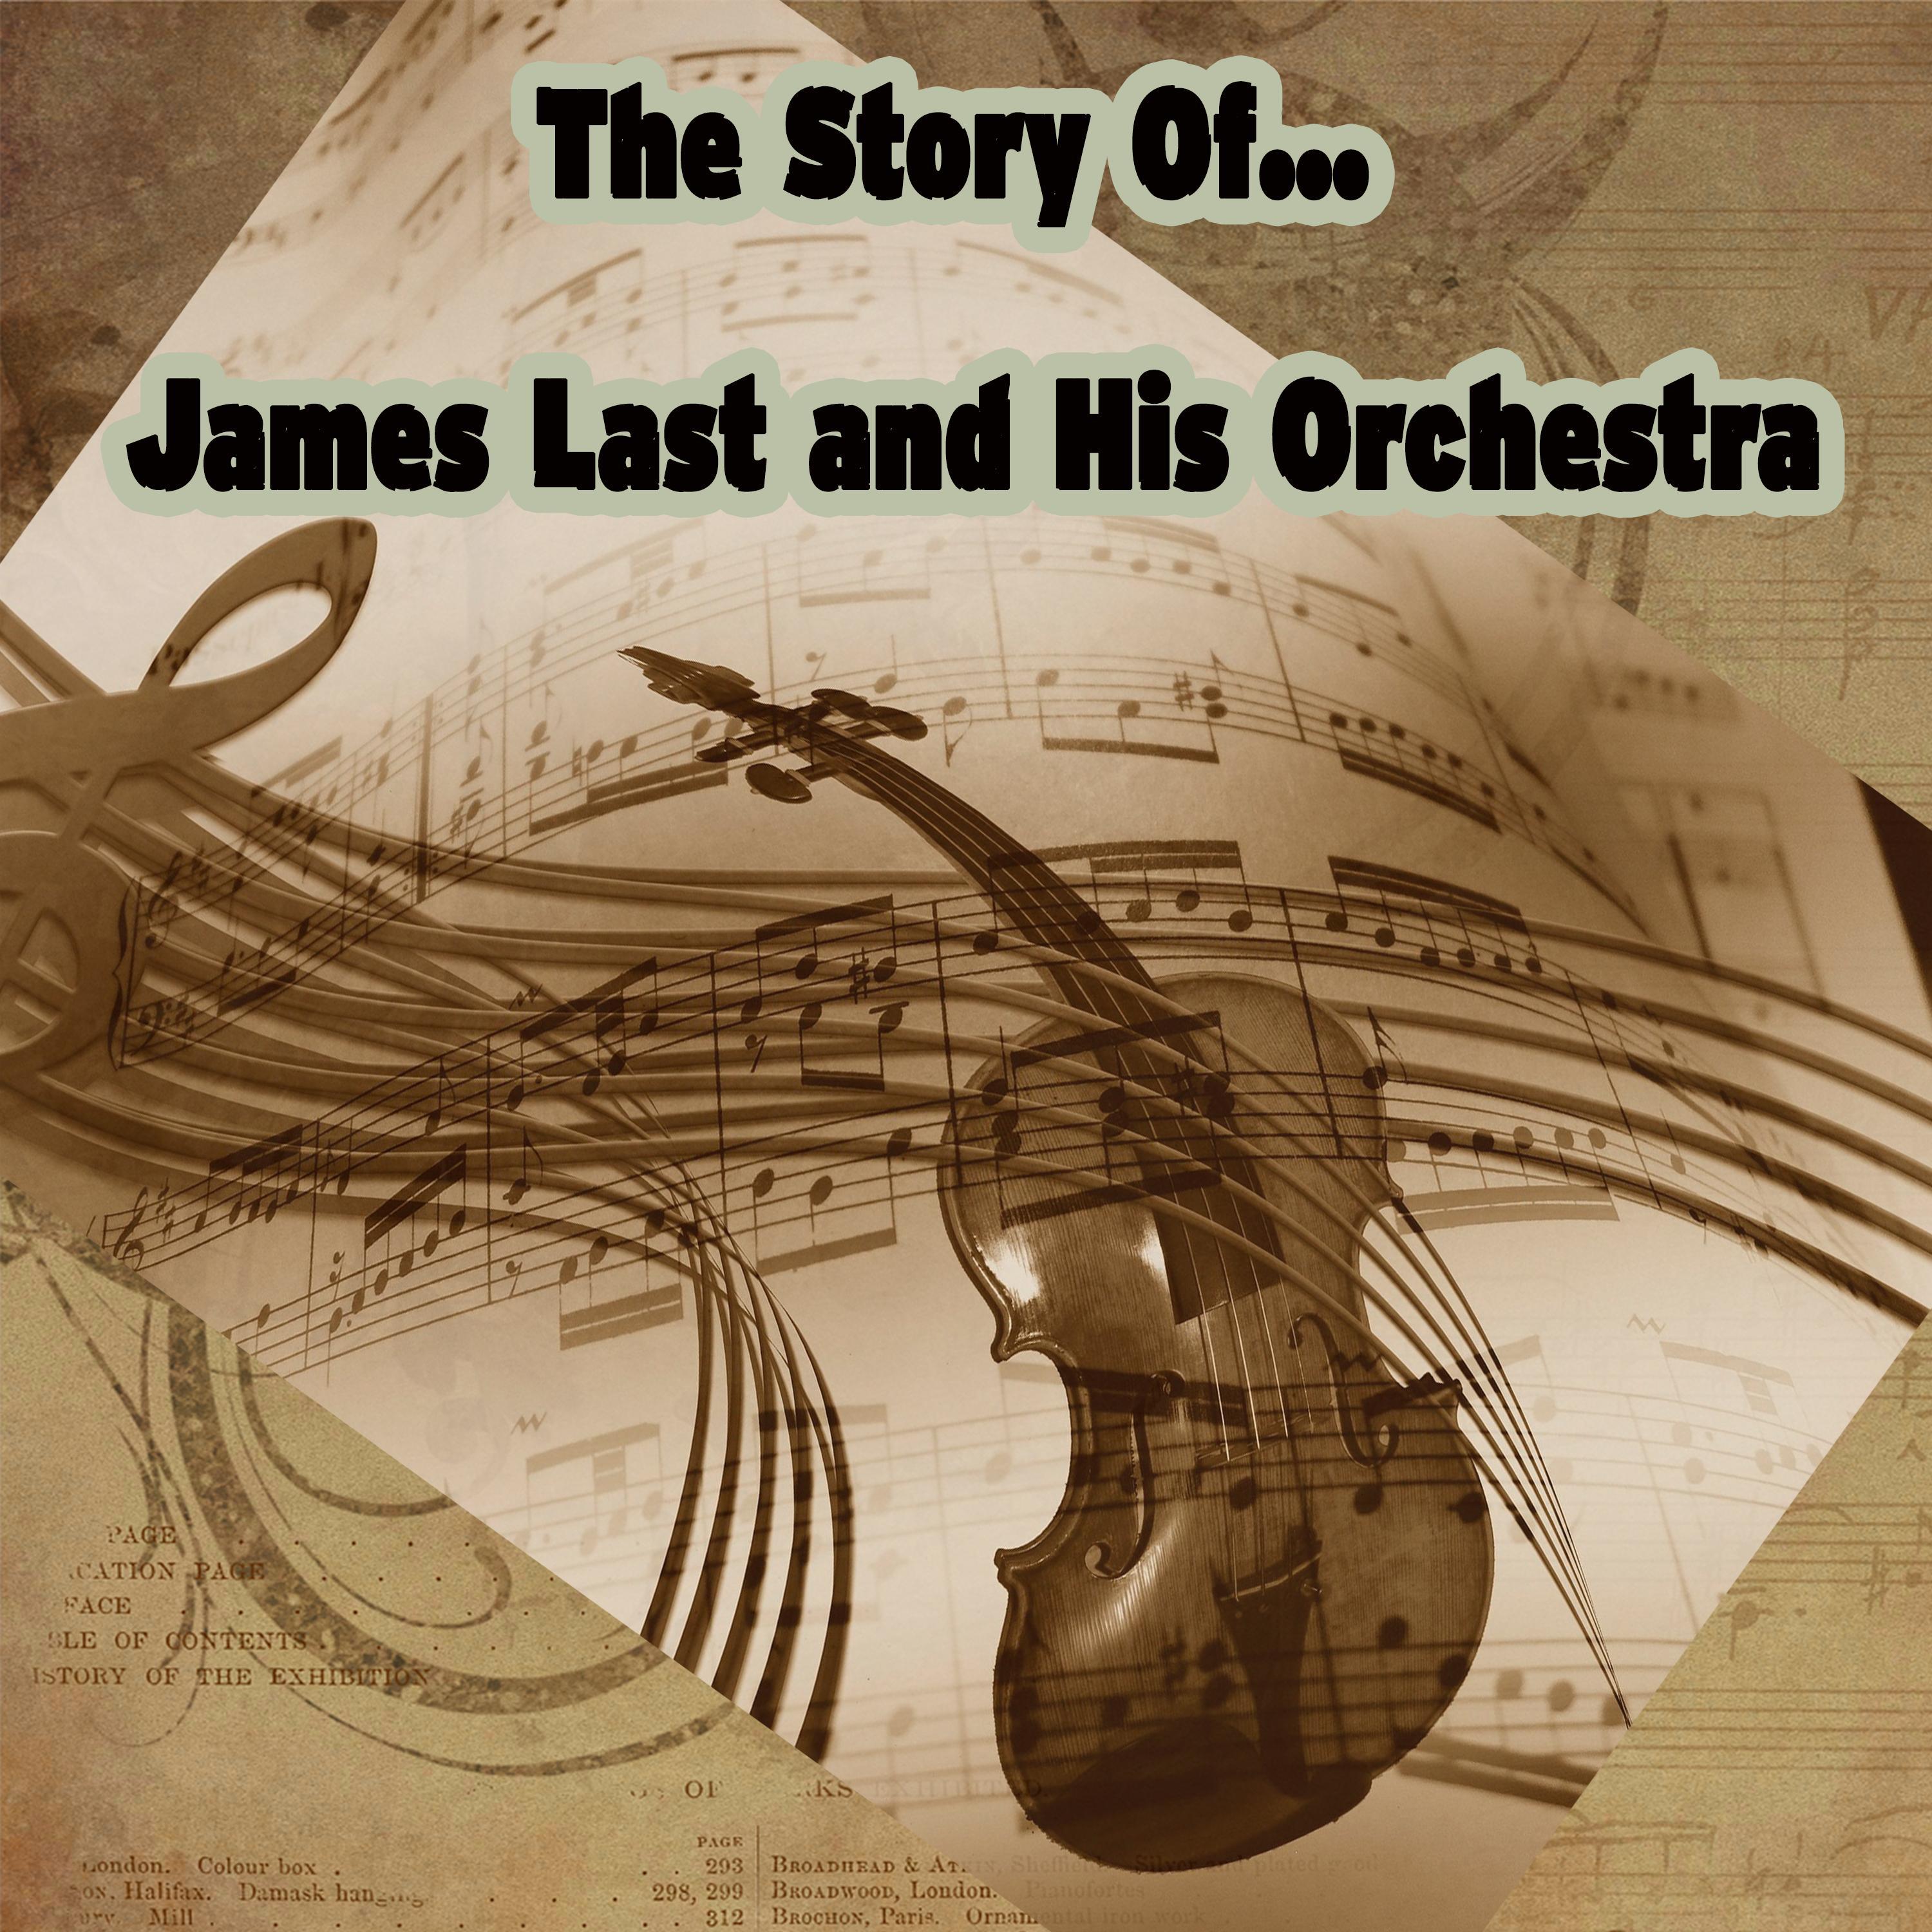 The Story of James Last and His Orchestra